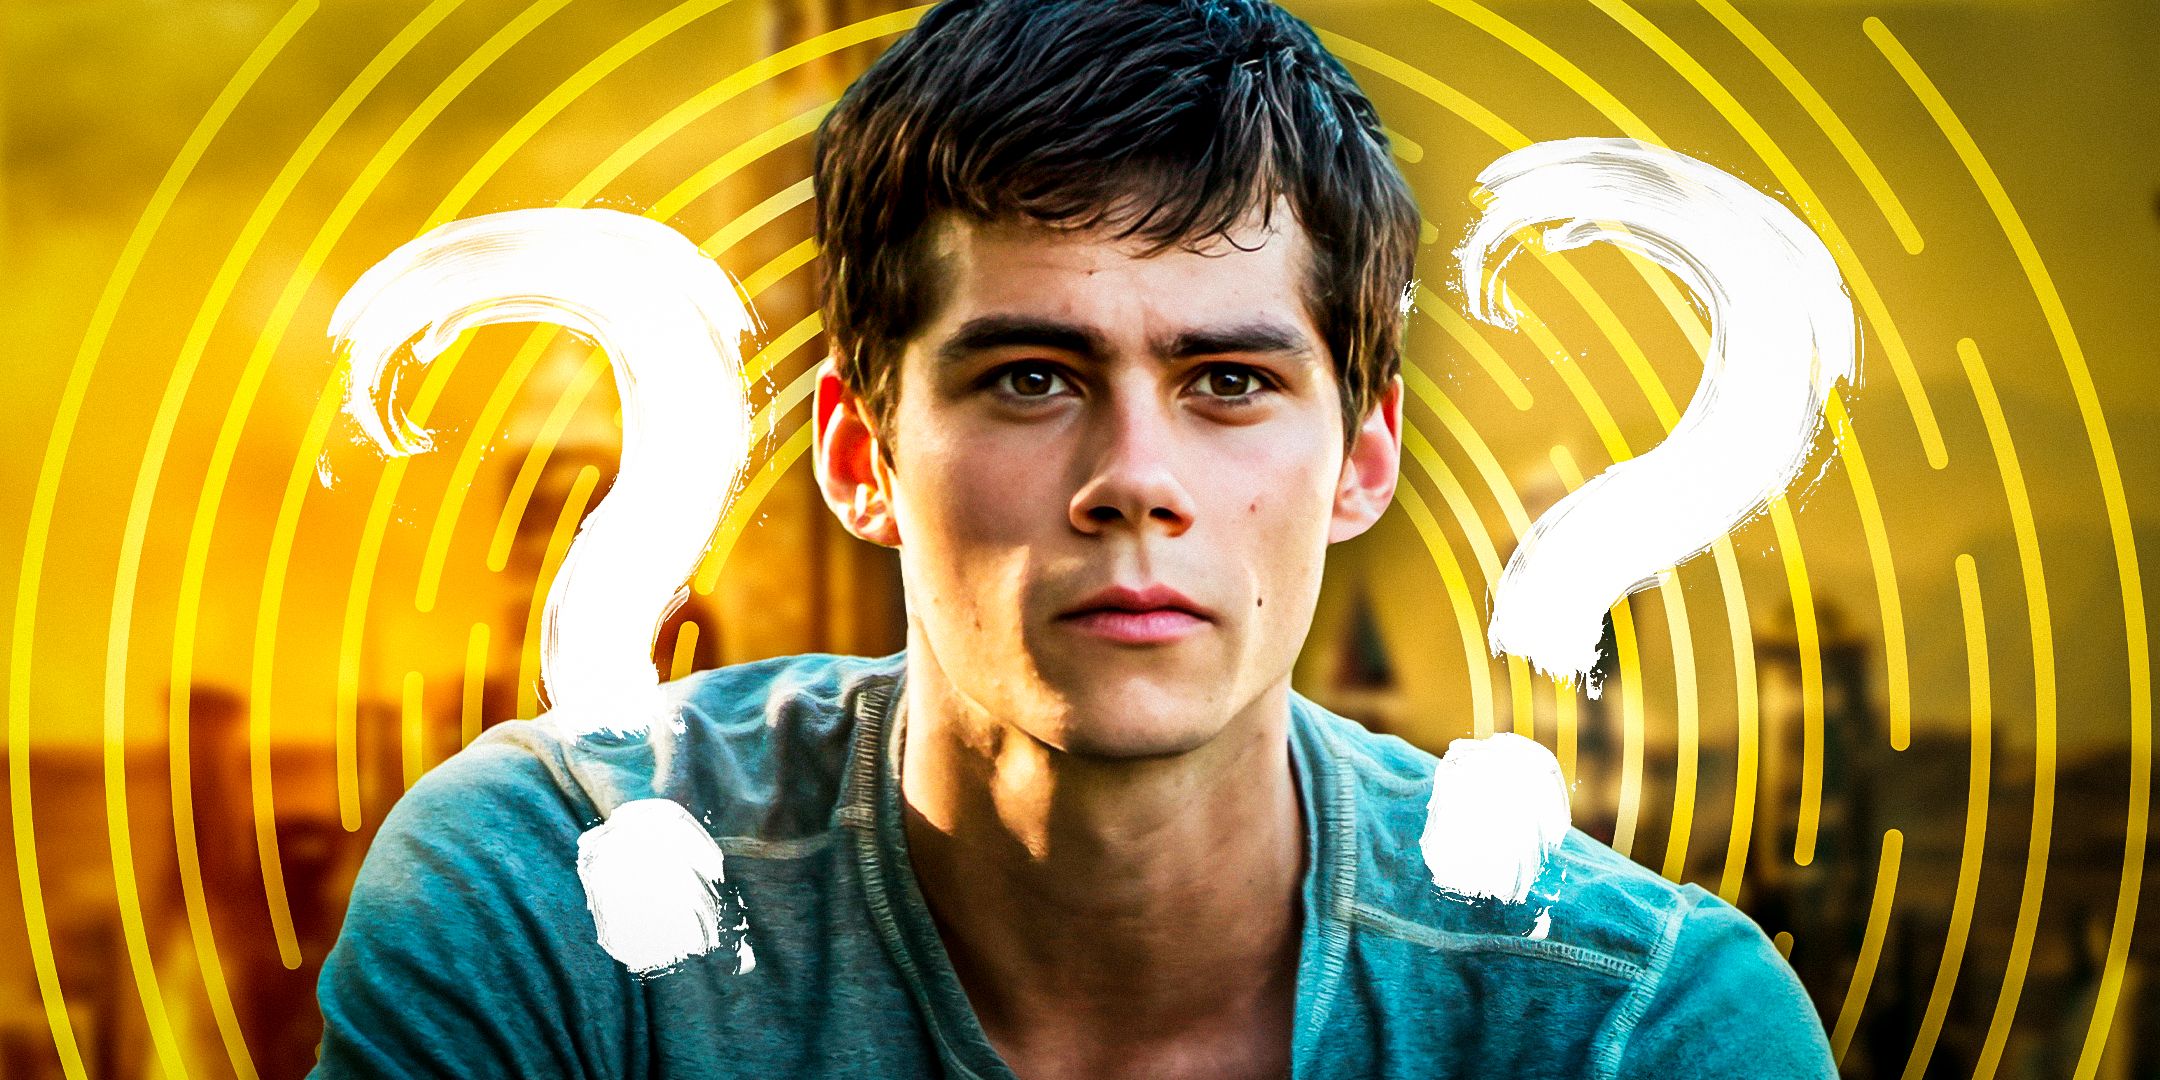 The Maze Runner 4 Can Finally Answer 1 Question I’ve Been Asking For 9 Years